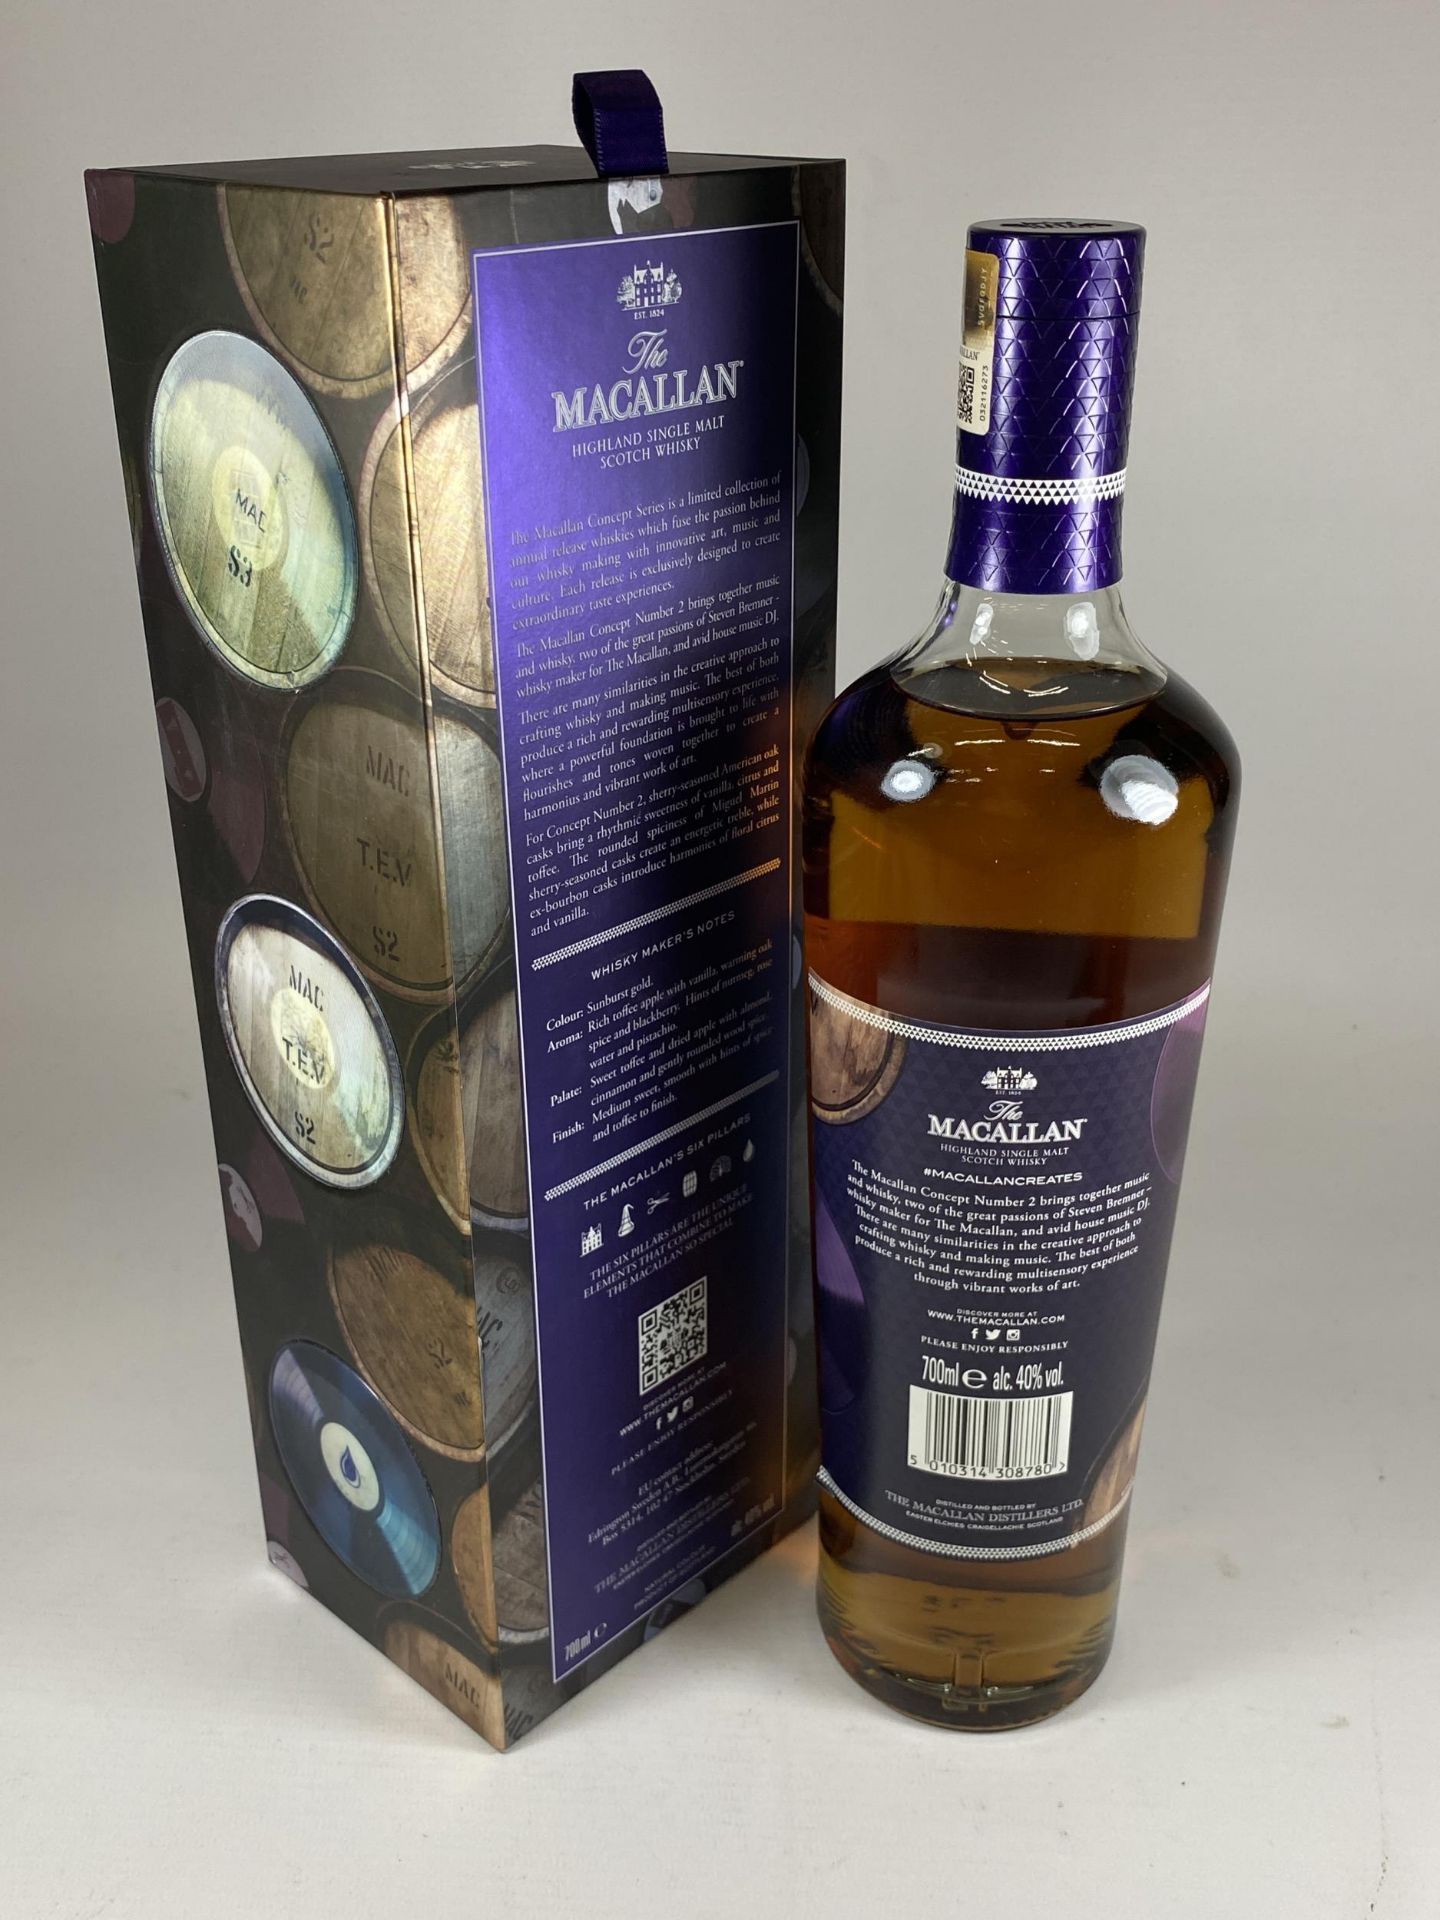 1 X BOXED 70CL BOTTLE - MACALLAN CONCEPT NO.2, LIMITED EDITION HIGHLAND SINGLE MALT SCOTCH WHISKY - Image 3 of 3